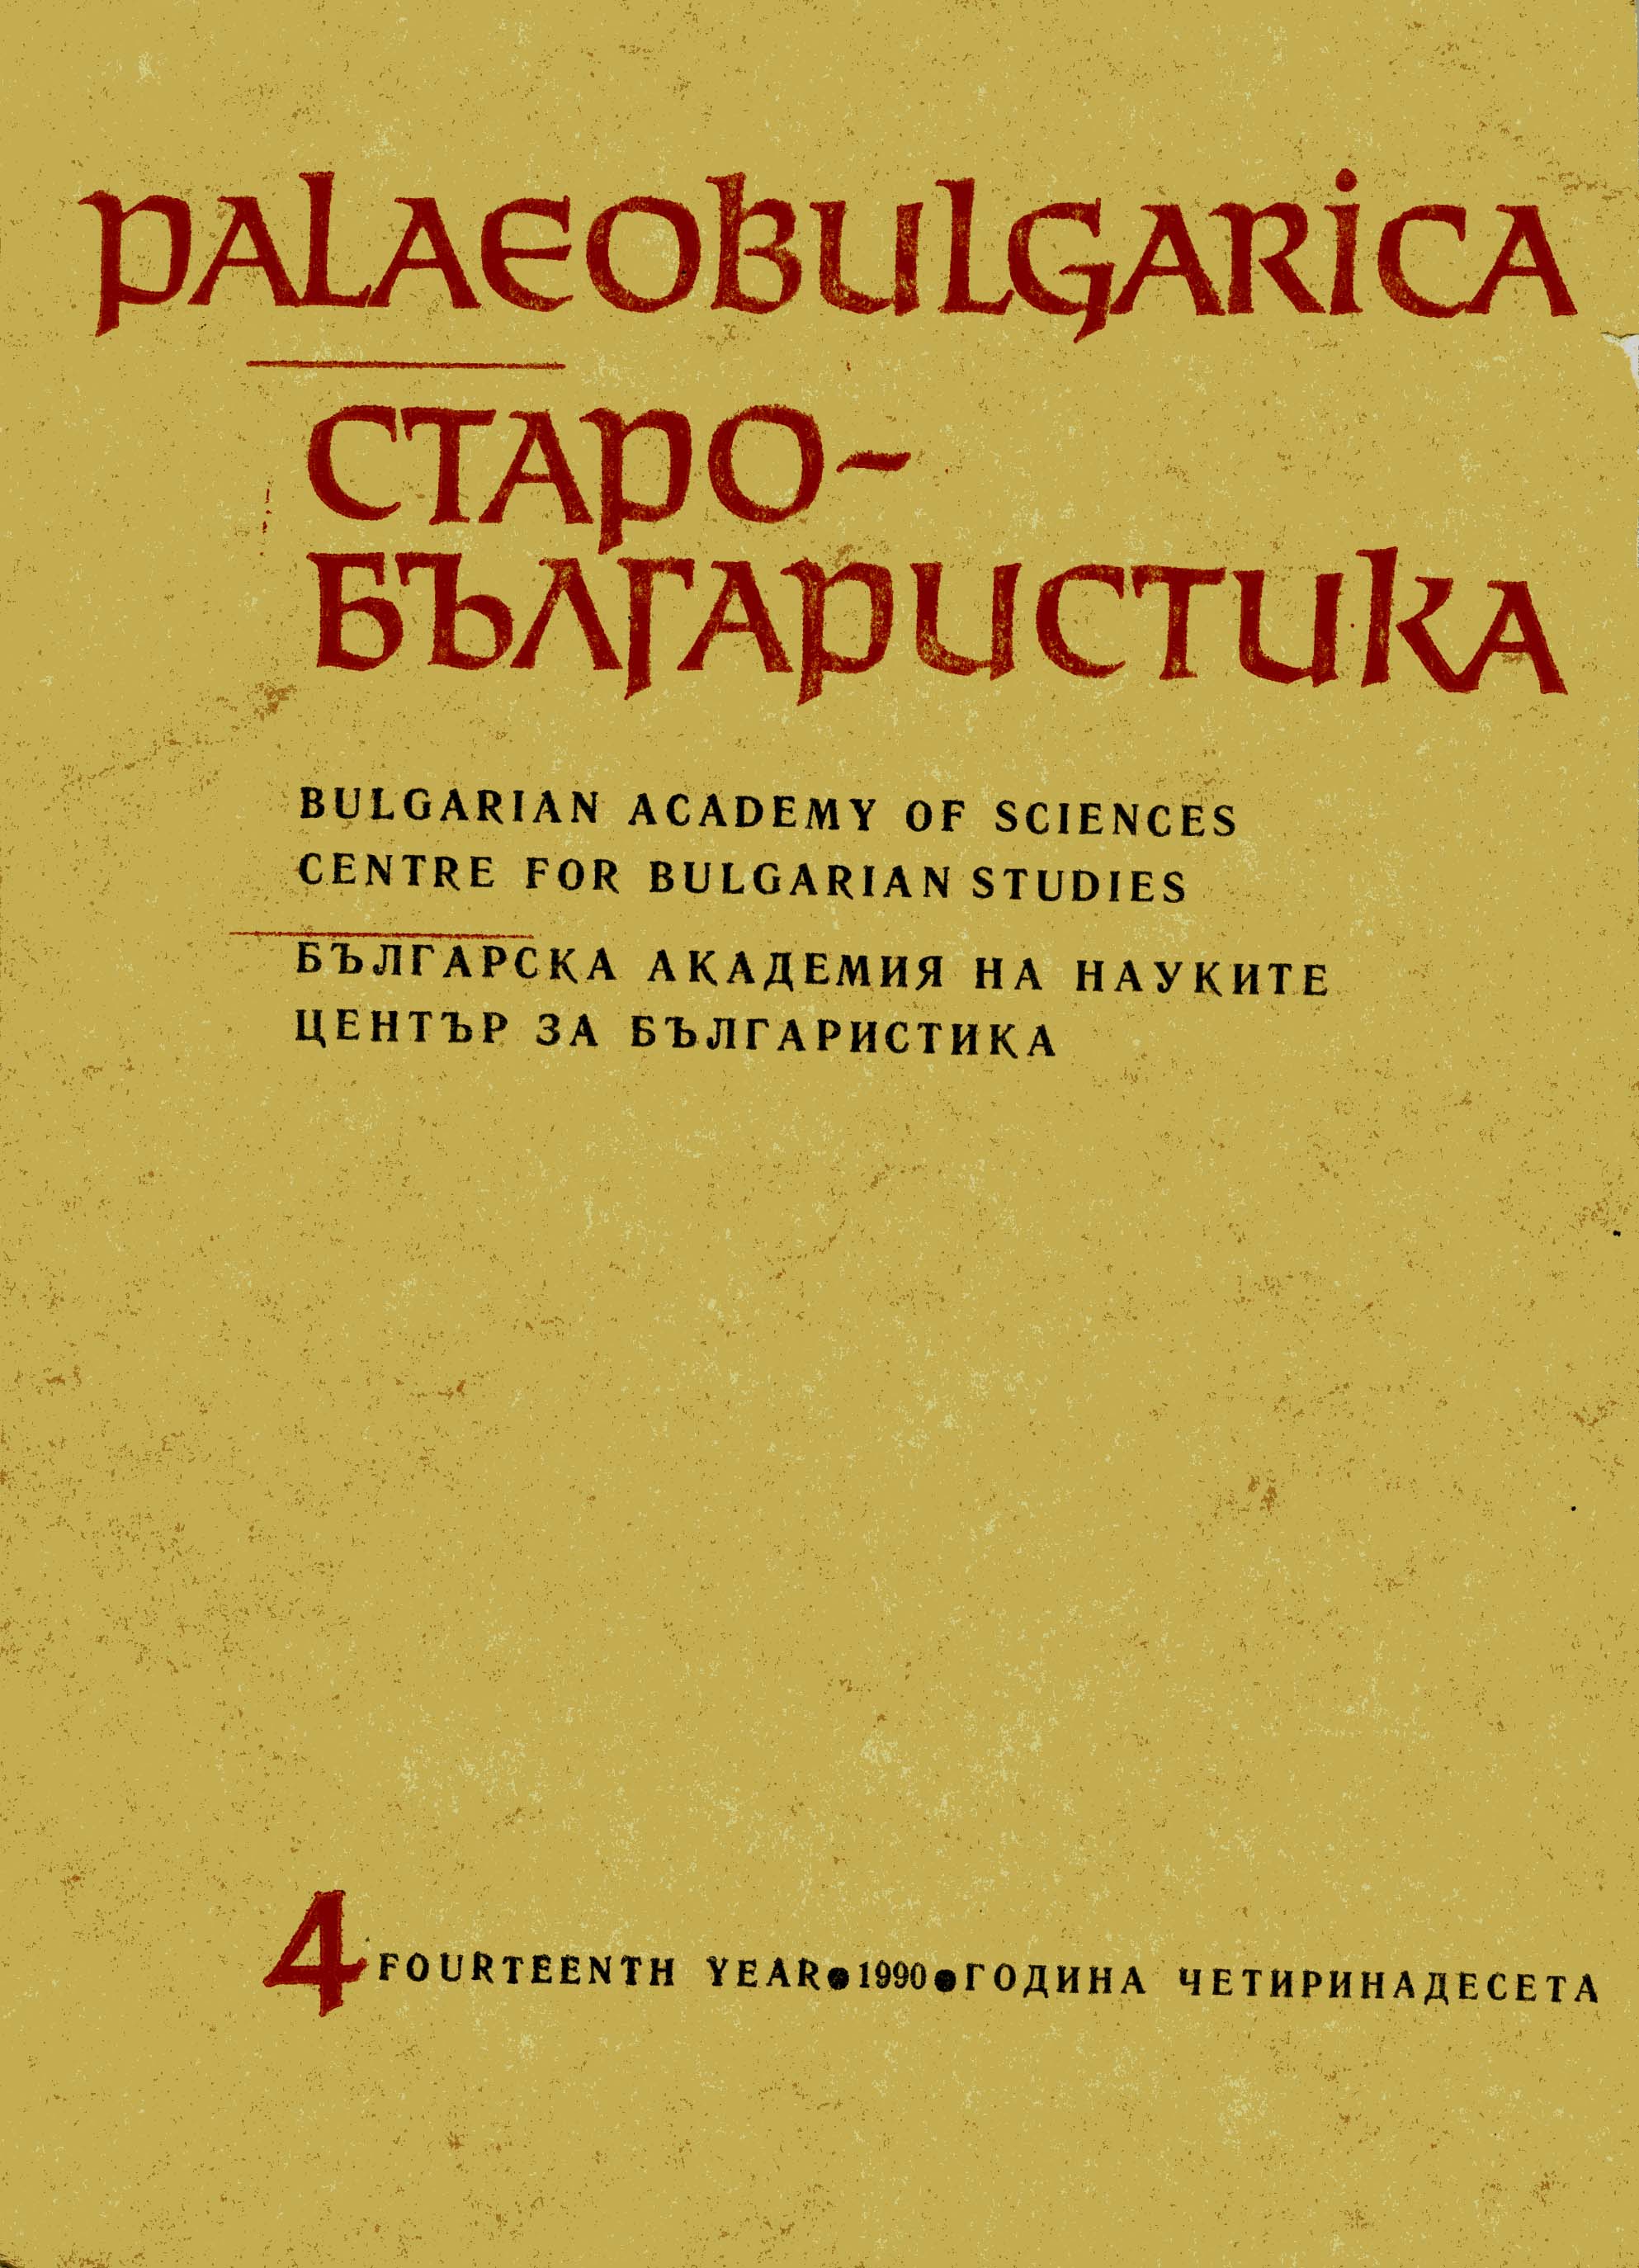 At lexical characteristic of Tarnovo Literary School Cover Image